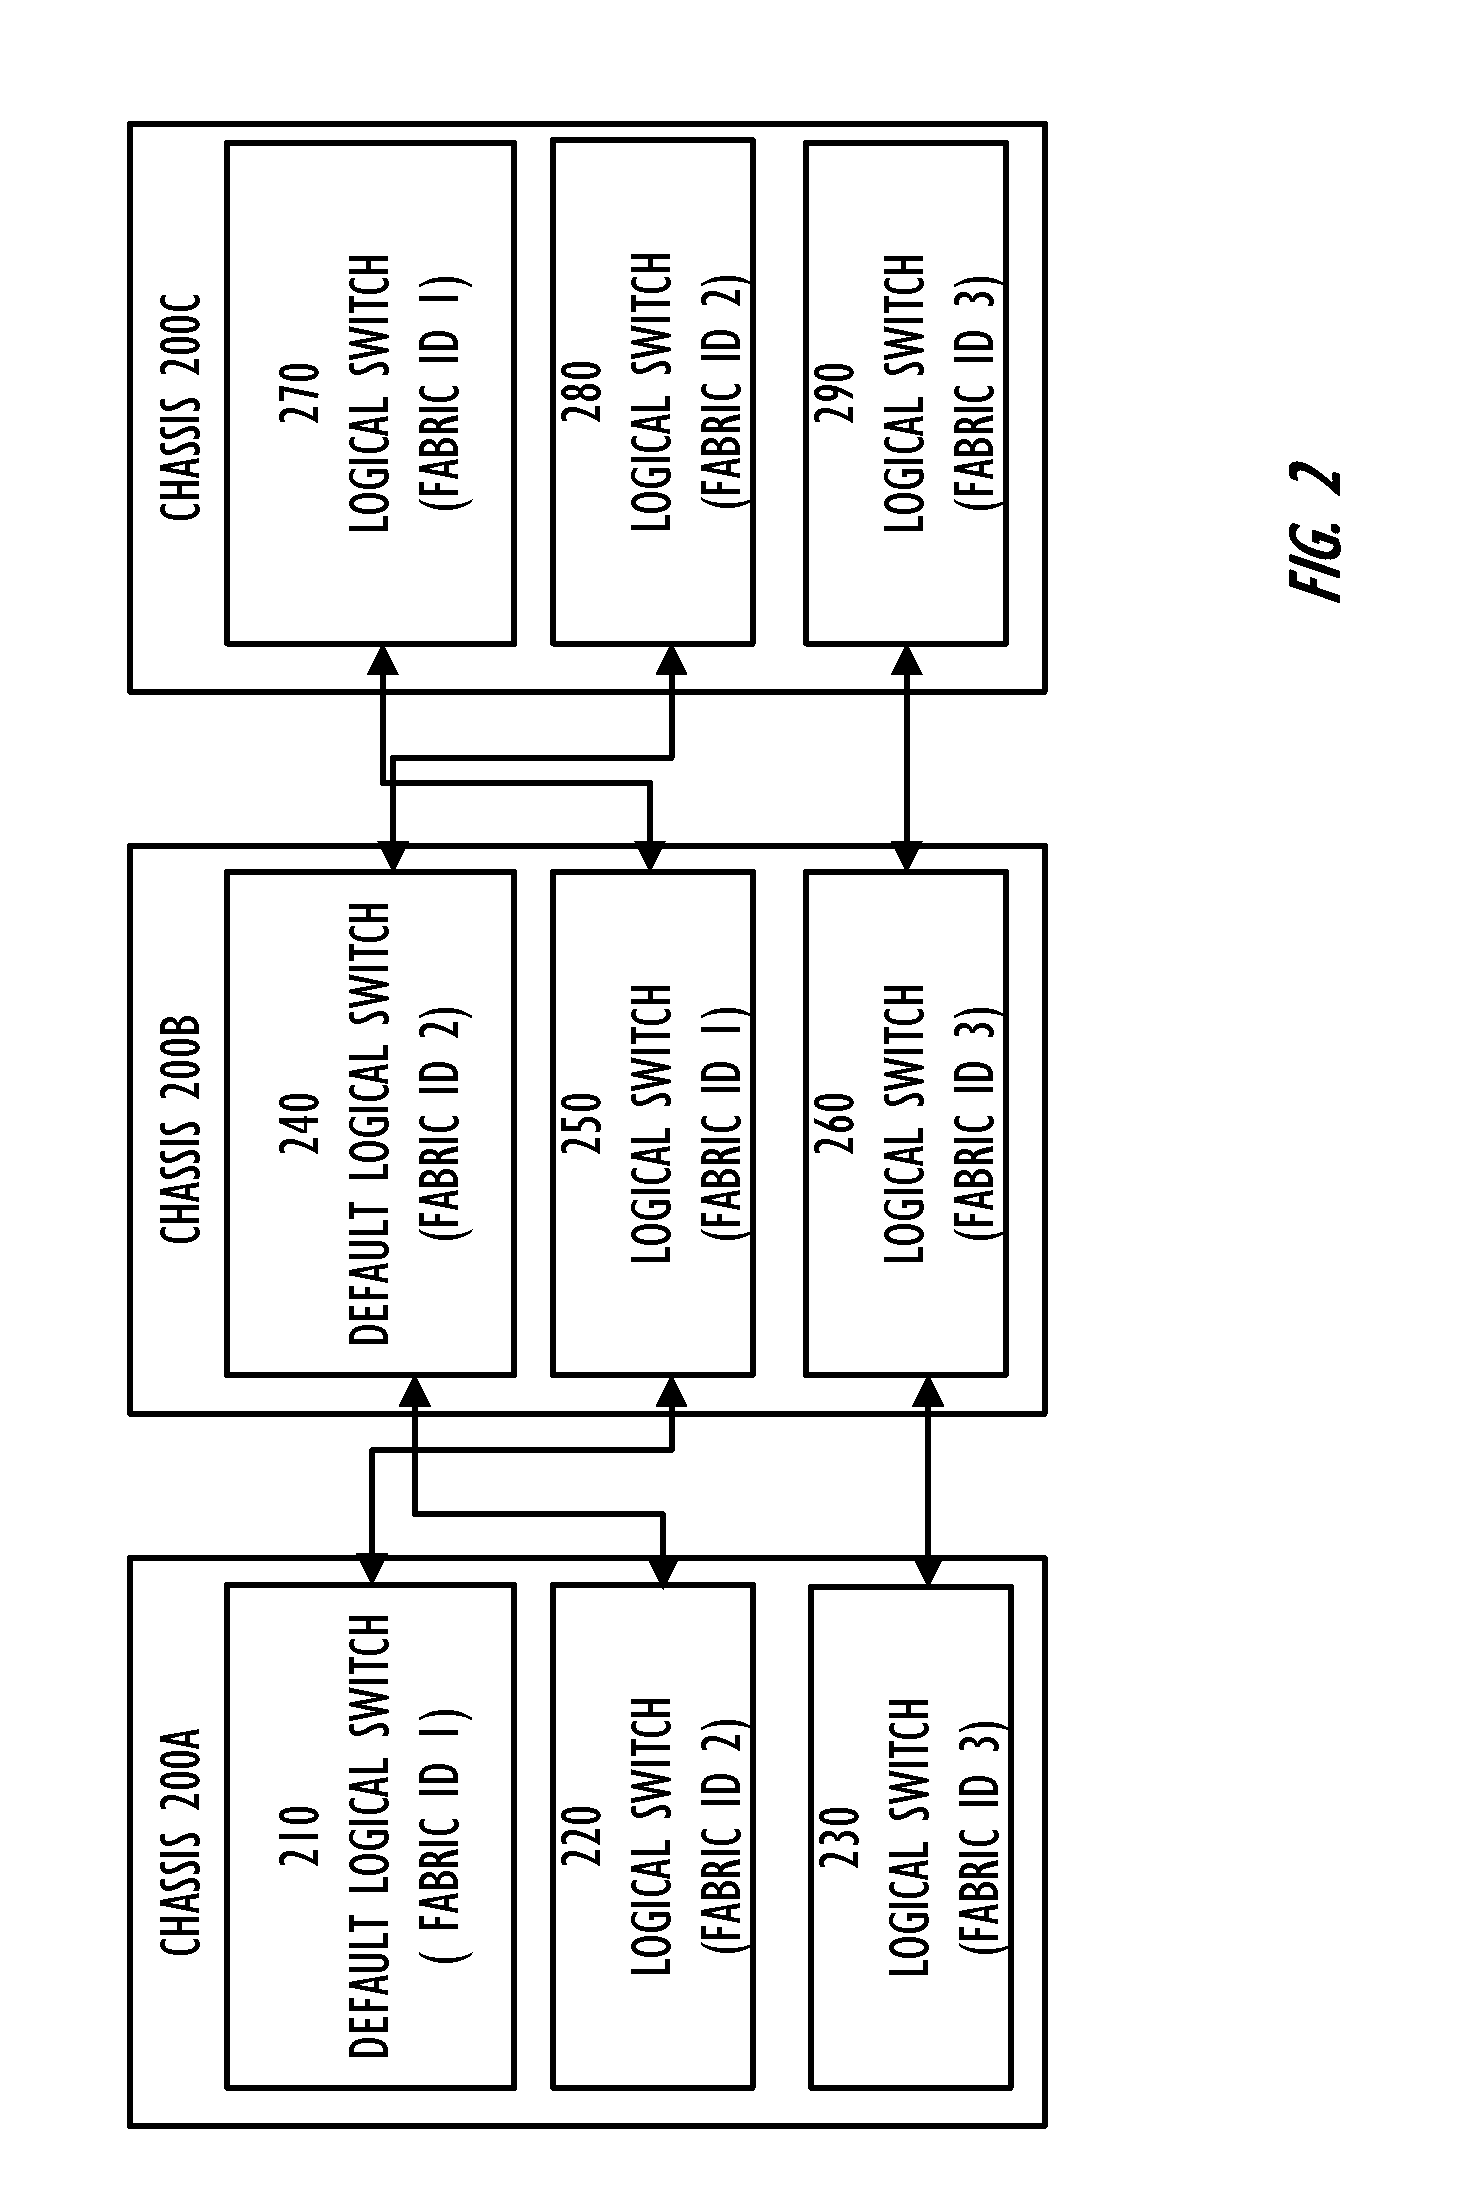 Creation and deletion of logical ports in a logical switch